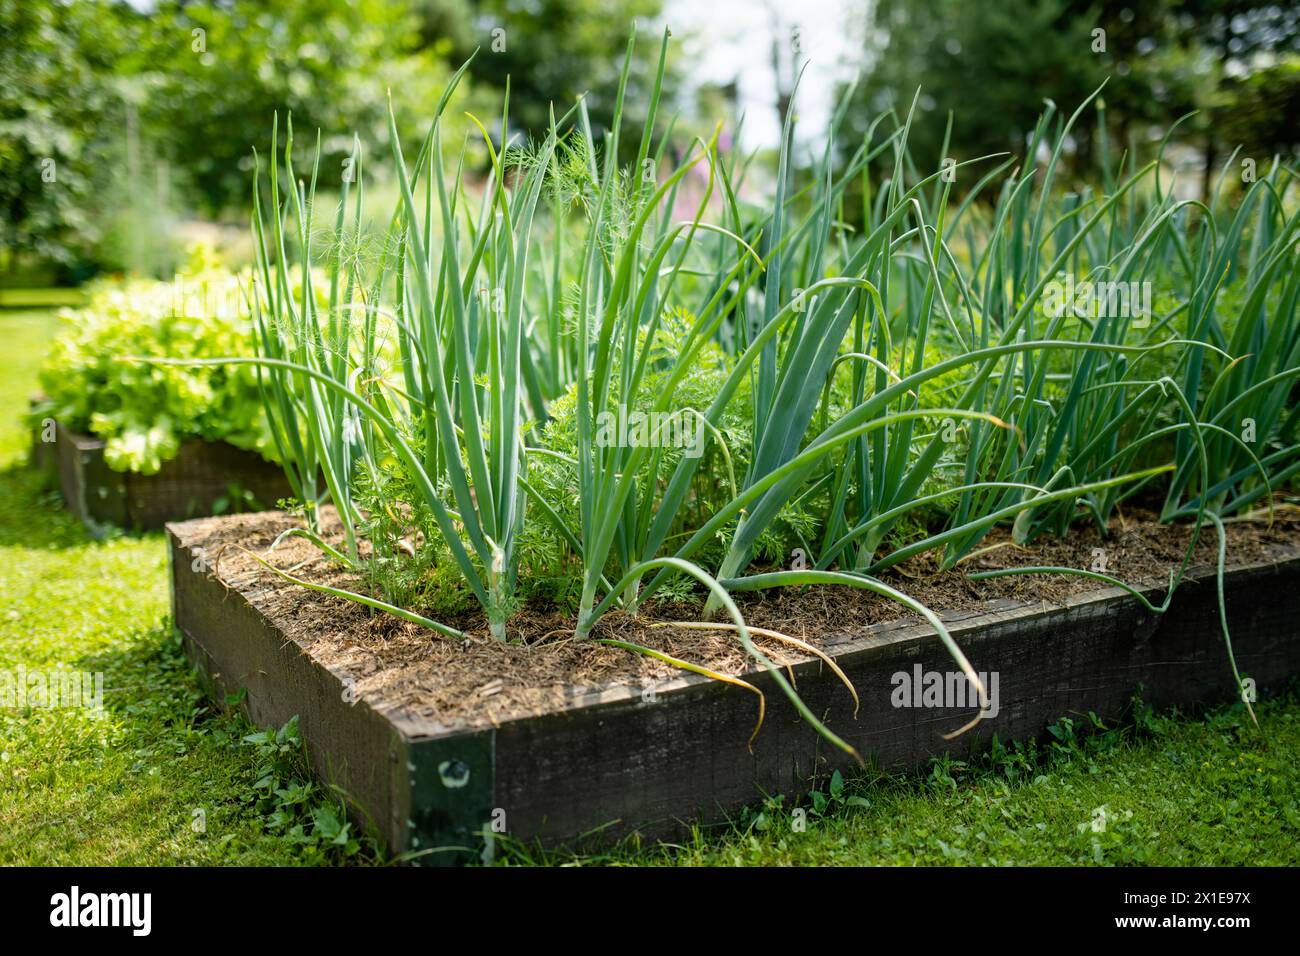 Cultivating onions in summer season. Growing own herbs and vegetables in a homestead. Gardening and lifestyle of self-sufficiency. Stock Photo